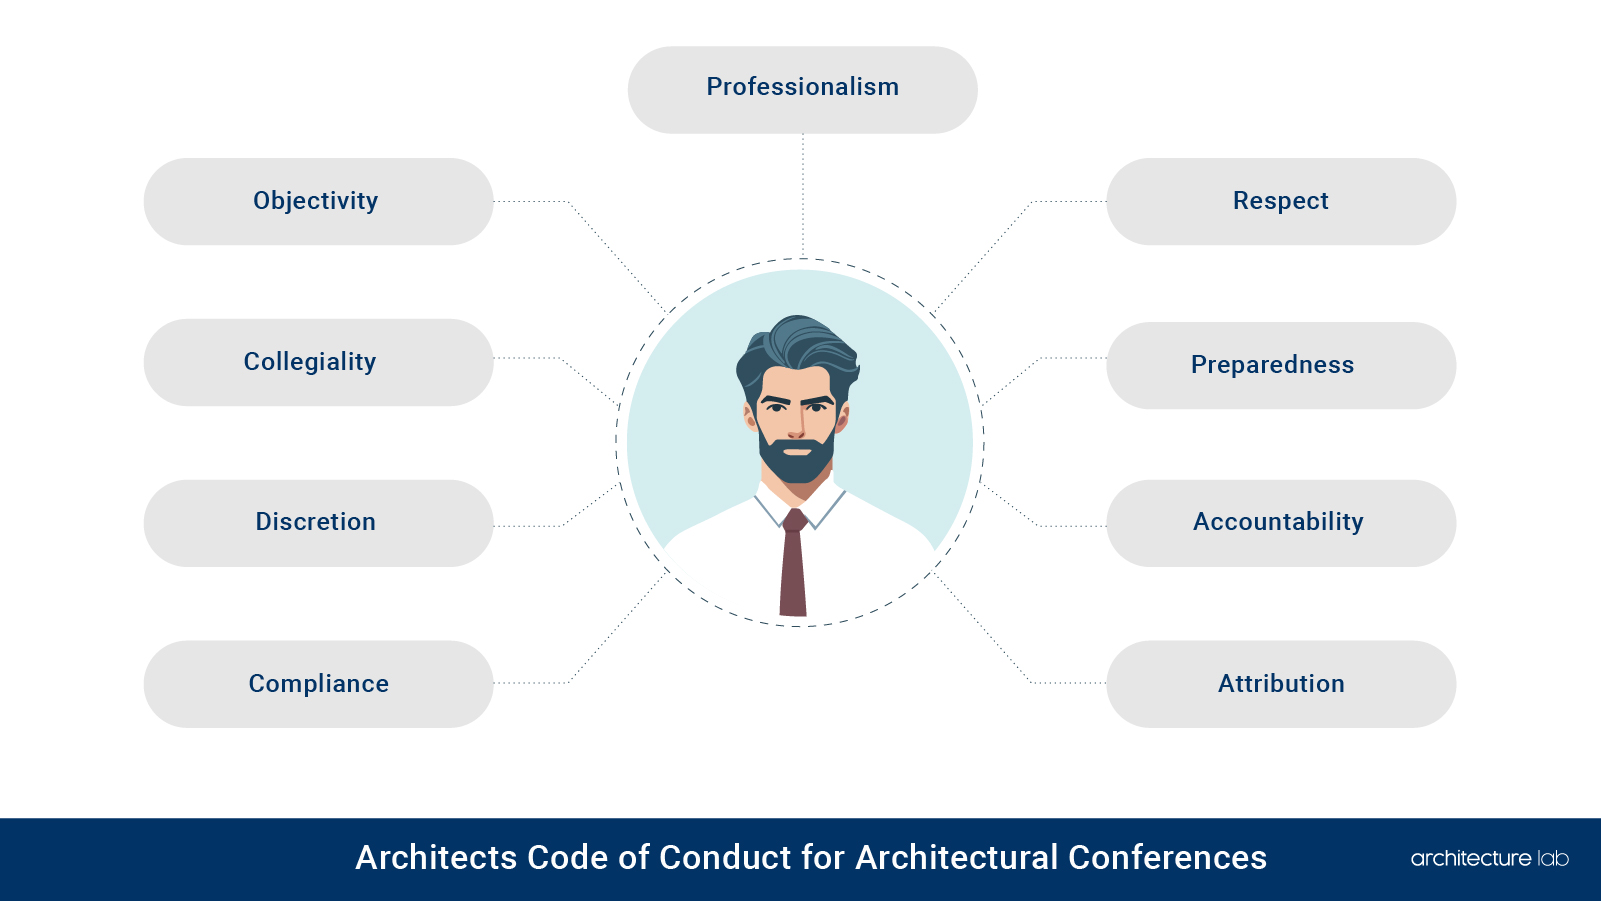 Does the code of conduct apply to architectural conferences?